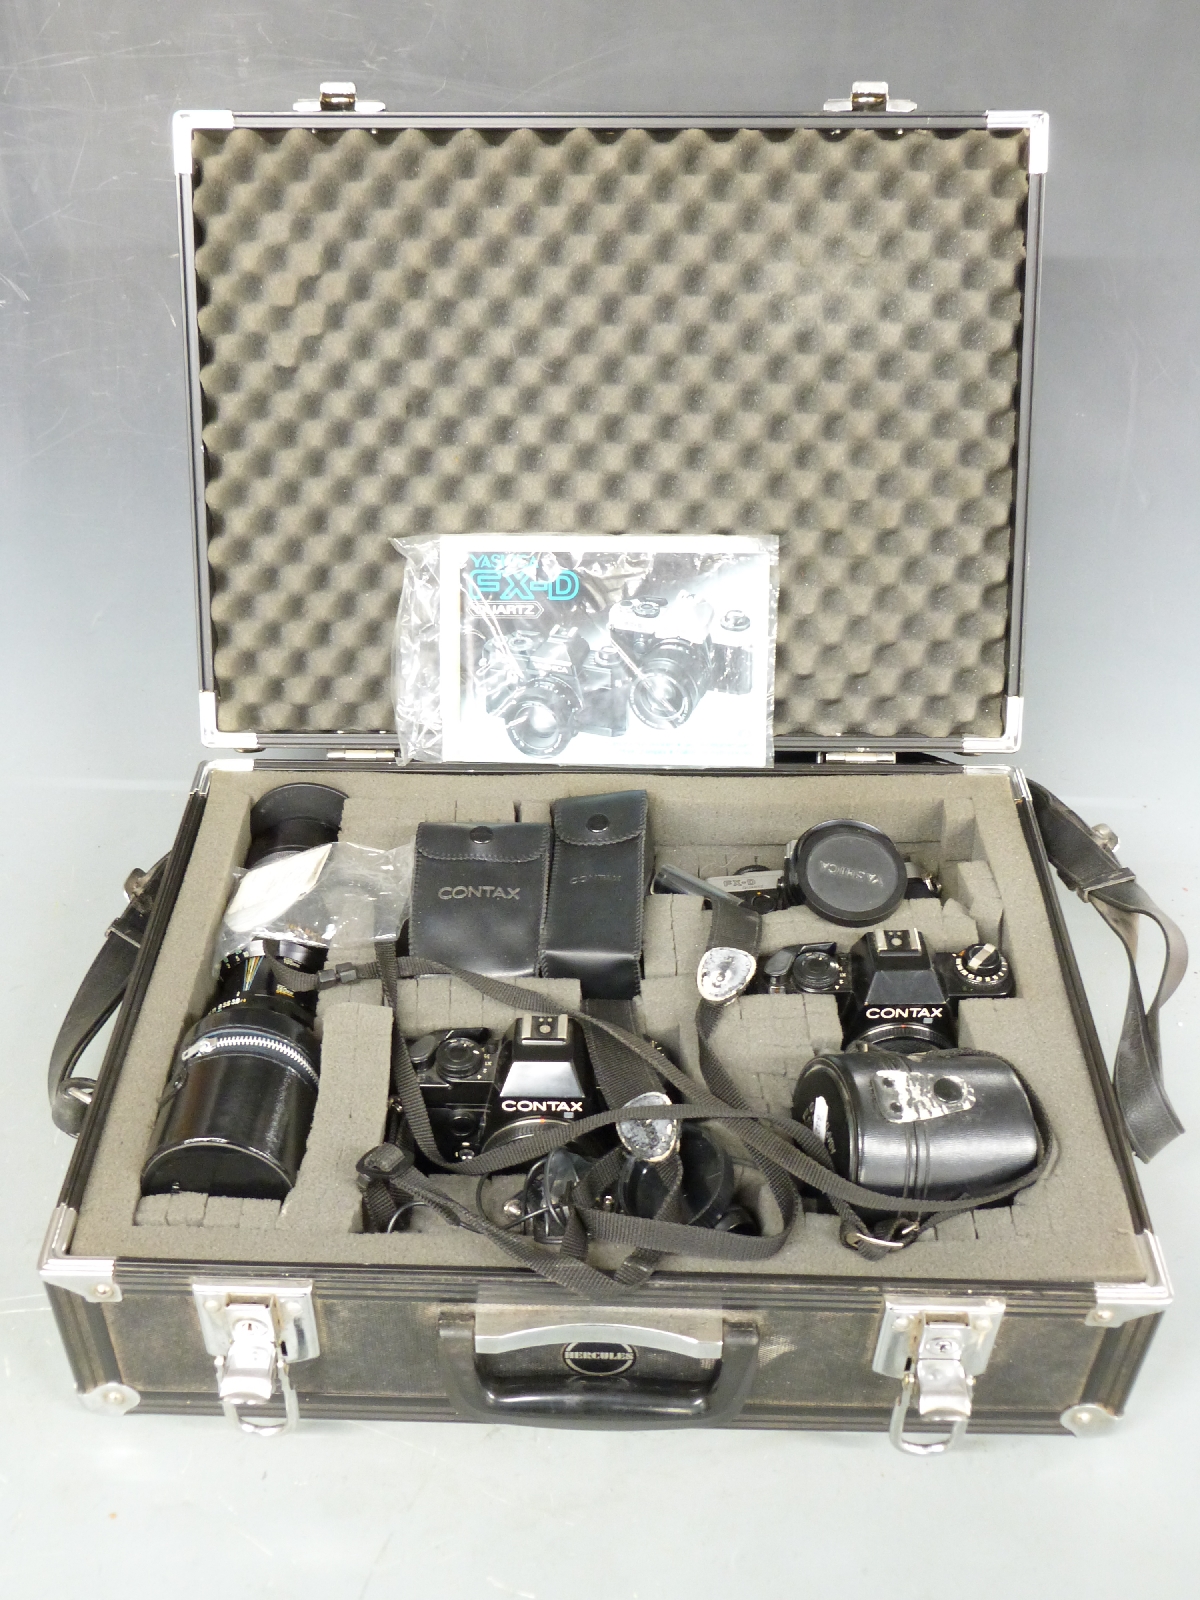 Contax and Yashica cameras, lenses and accessories to include two Contax 139 Quartz SLR bodies, - Image 2 of 3